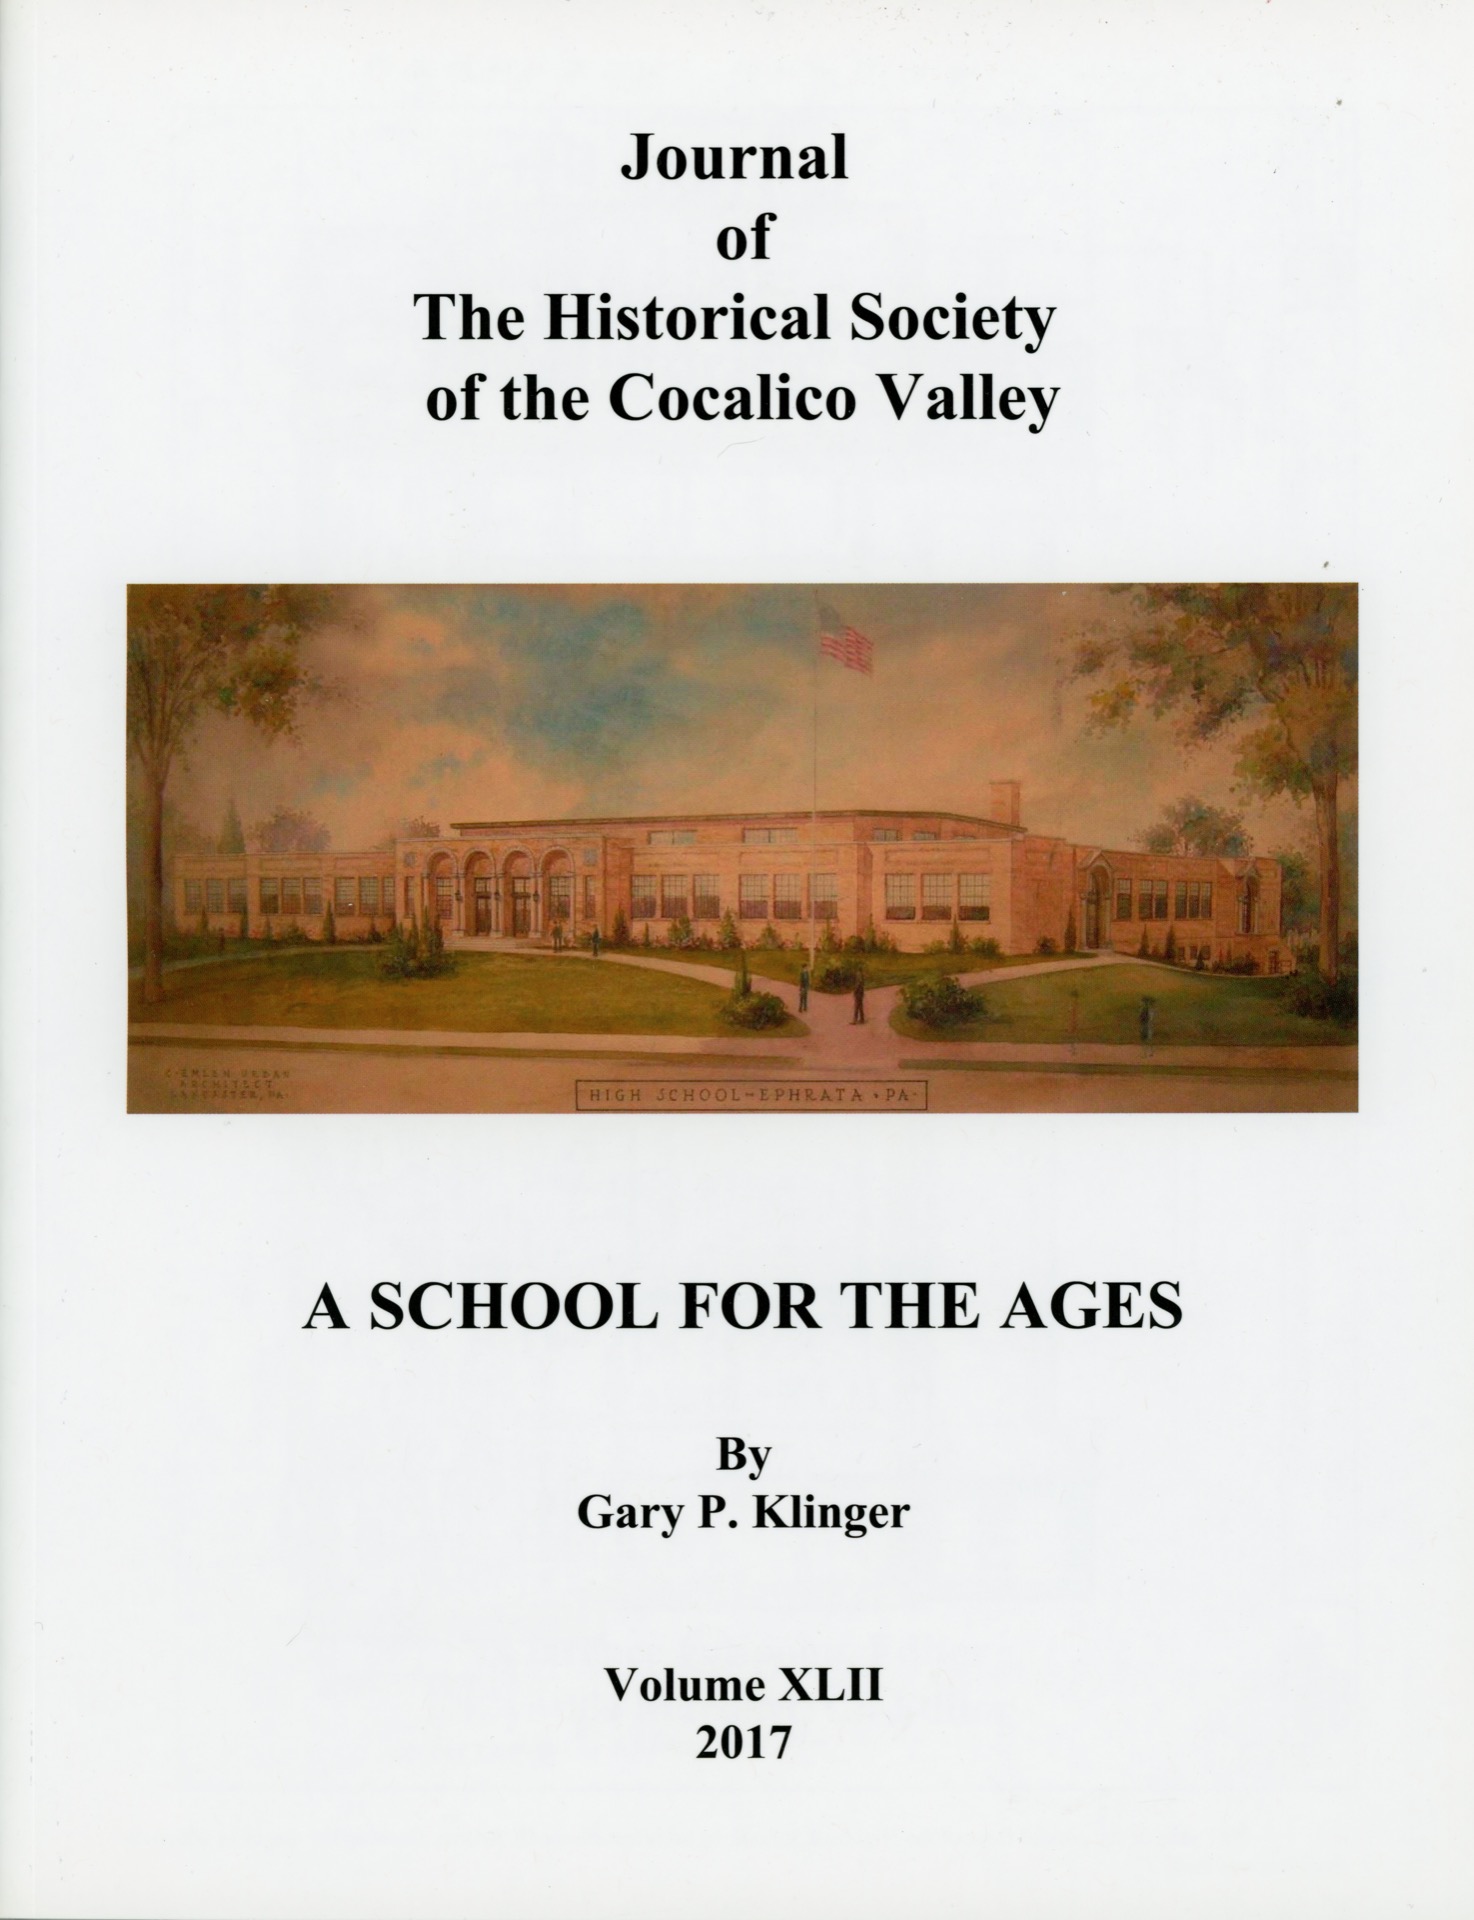 Vol. XLII: “A School for the Ages,” by Gary P. Klinger.